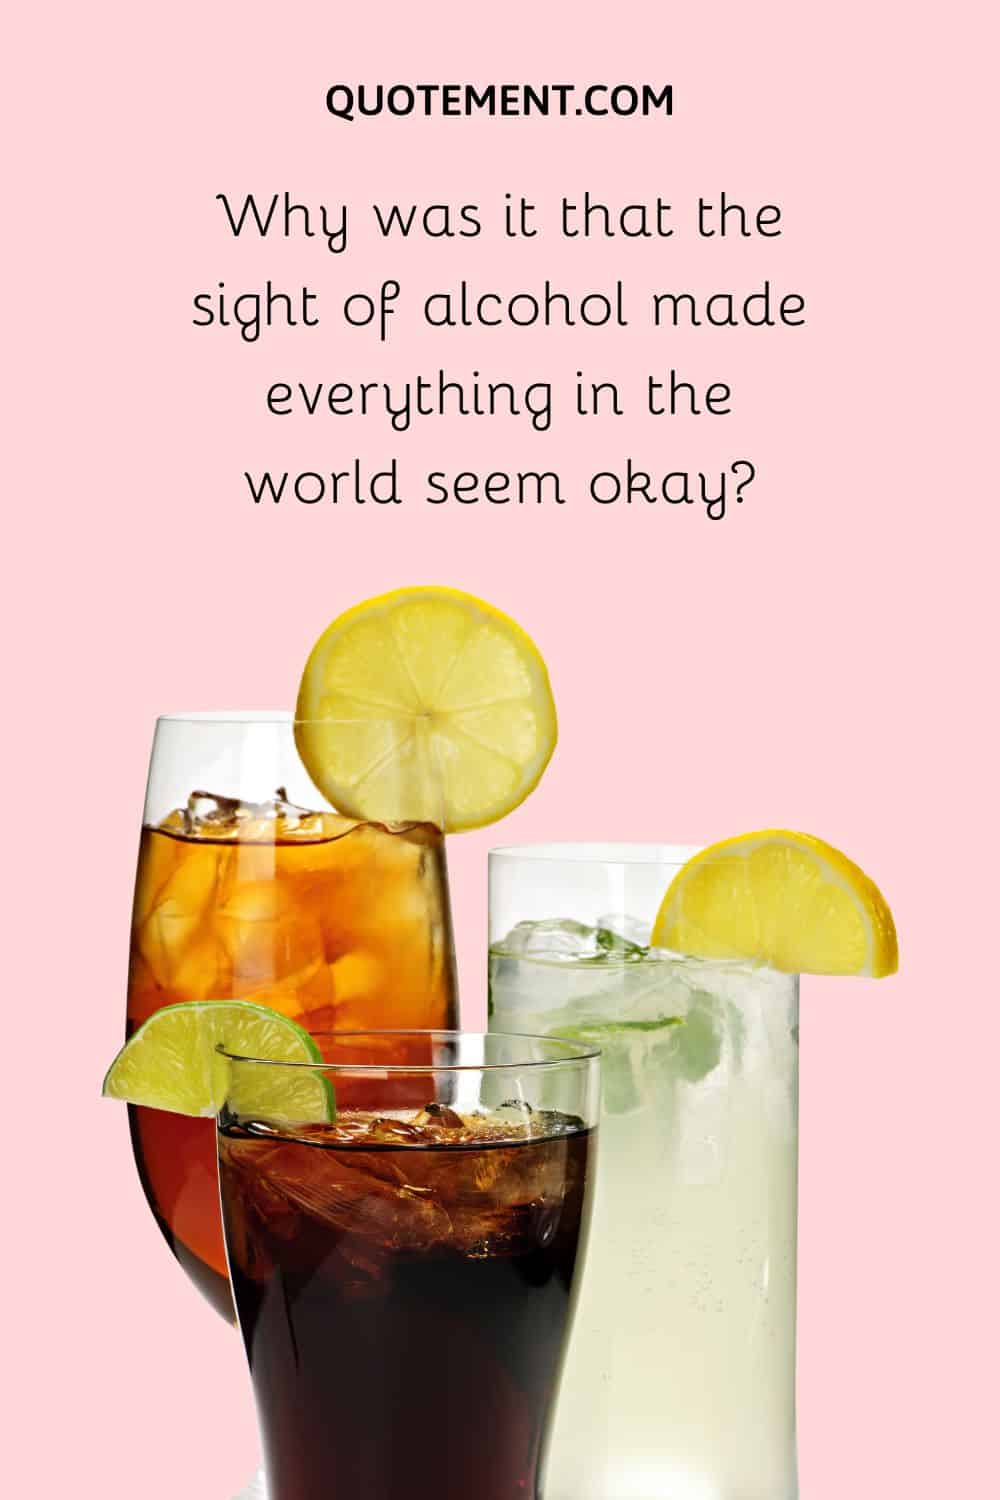 Why was it that the sight of alcohol made everything in the world seem okay